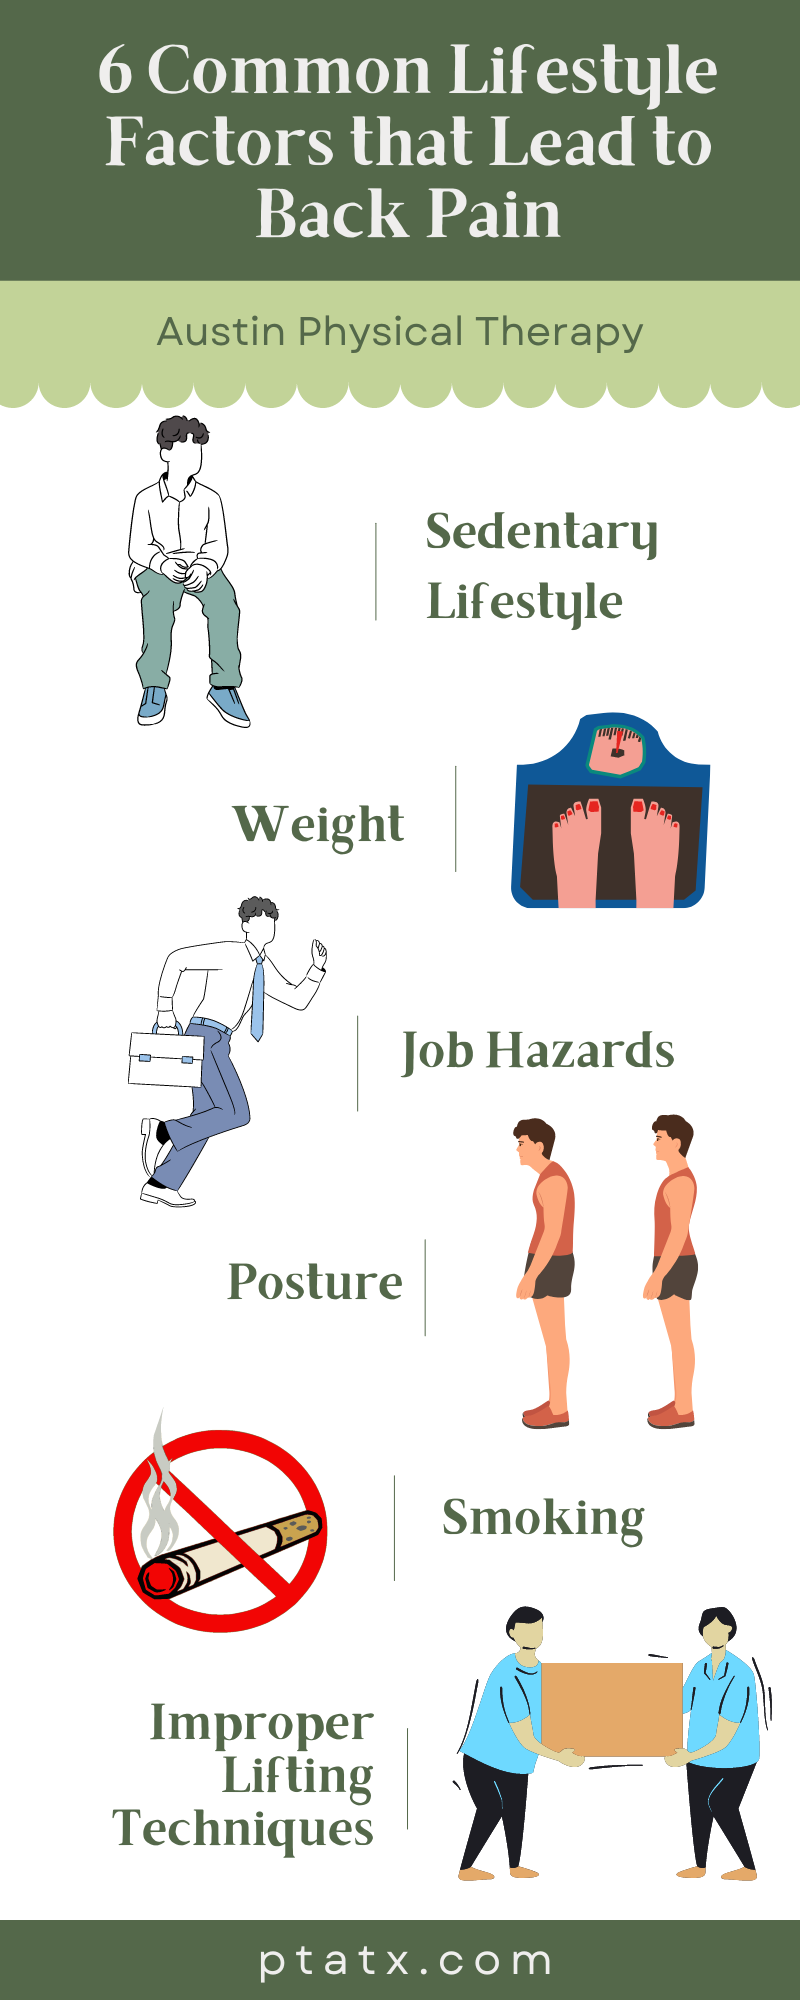 Common Lifestyle Factors that Lead to Back Pain Infographic